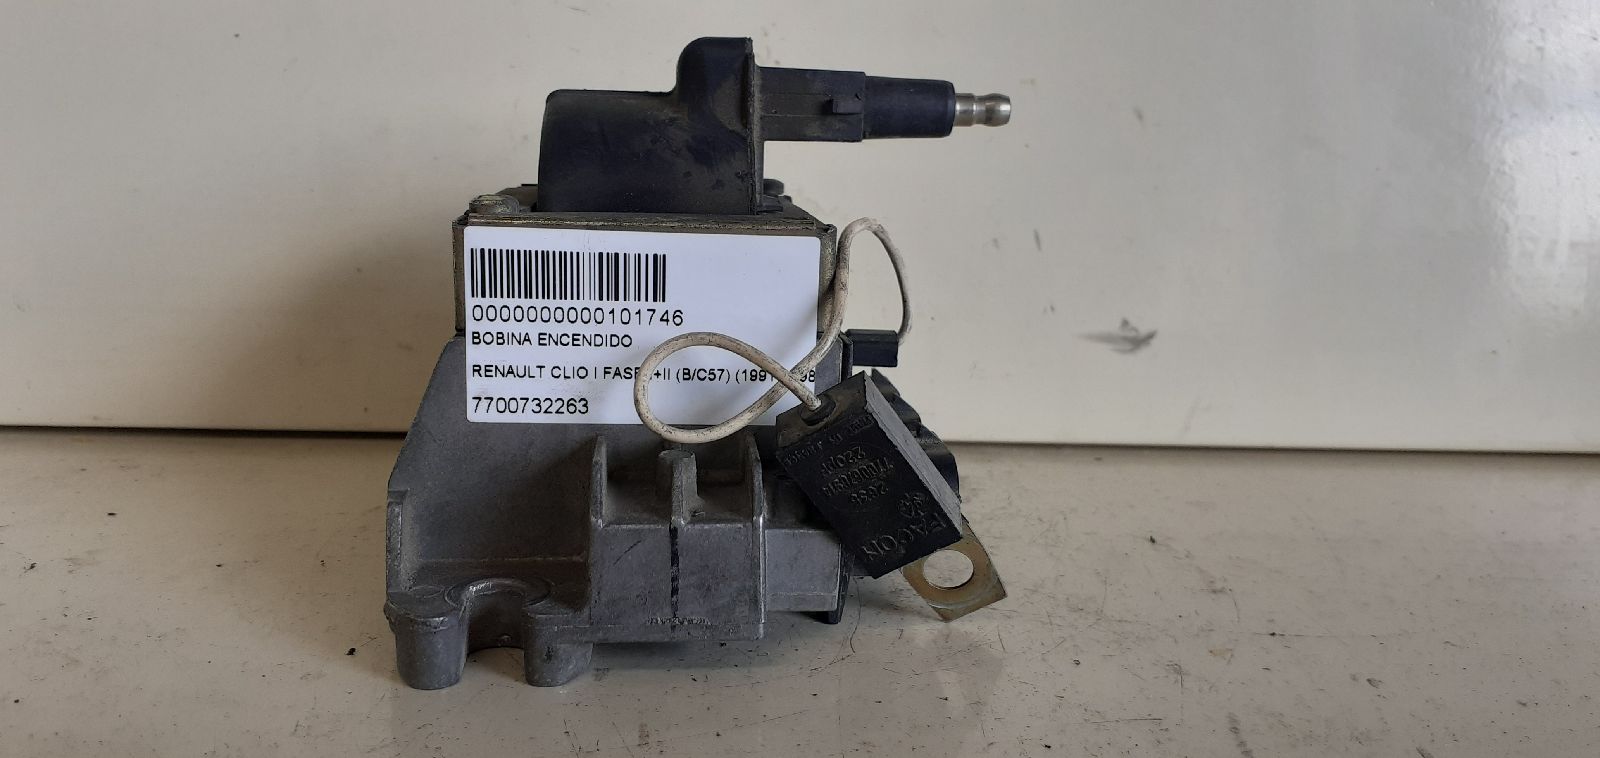 RENAULT Clio 1 generation (1990-1998) High Voltage Ignition Coil 7700732263 25280824